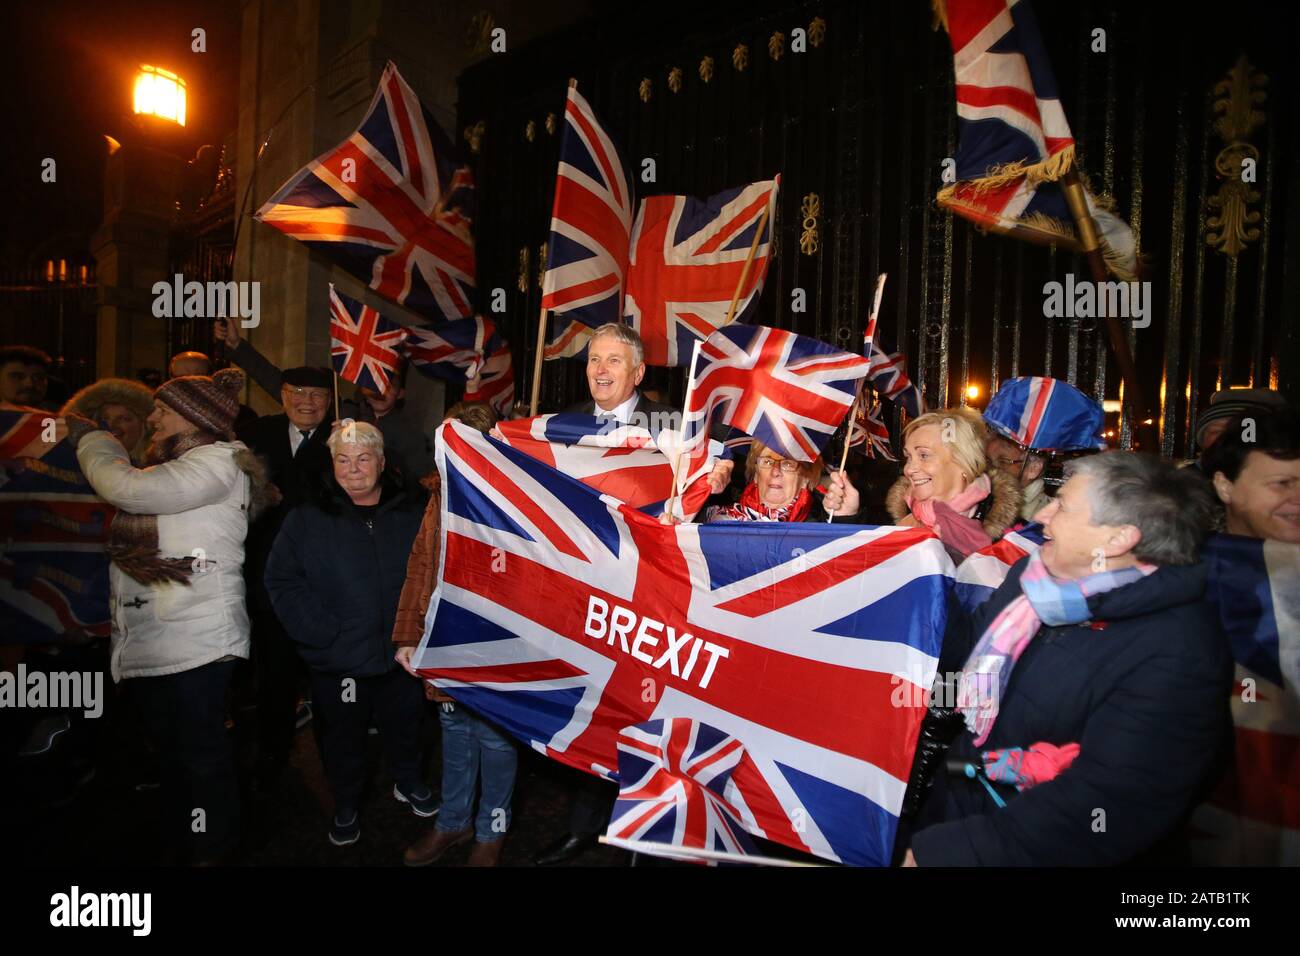 Belfast, Northern Ireland. 31st Jan, 2020. Pro-Brexit supporters celebrate Brexit outside Stormont in east Belfast, Northern Ireland, Britain on Jan. 31, 2020. Britain officially left the European Union (EU) at 11 p.m. (2300 GMT) Friday, putting an end to its 47-year-long membership of the world's largest trading bloc. Credit: Paul McErlane/Xinhua/Alamy Live News Stock Photo